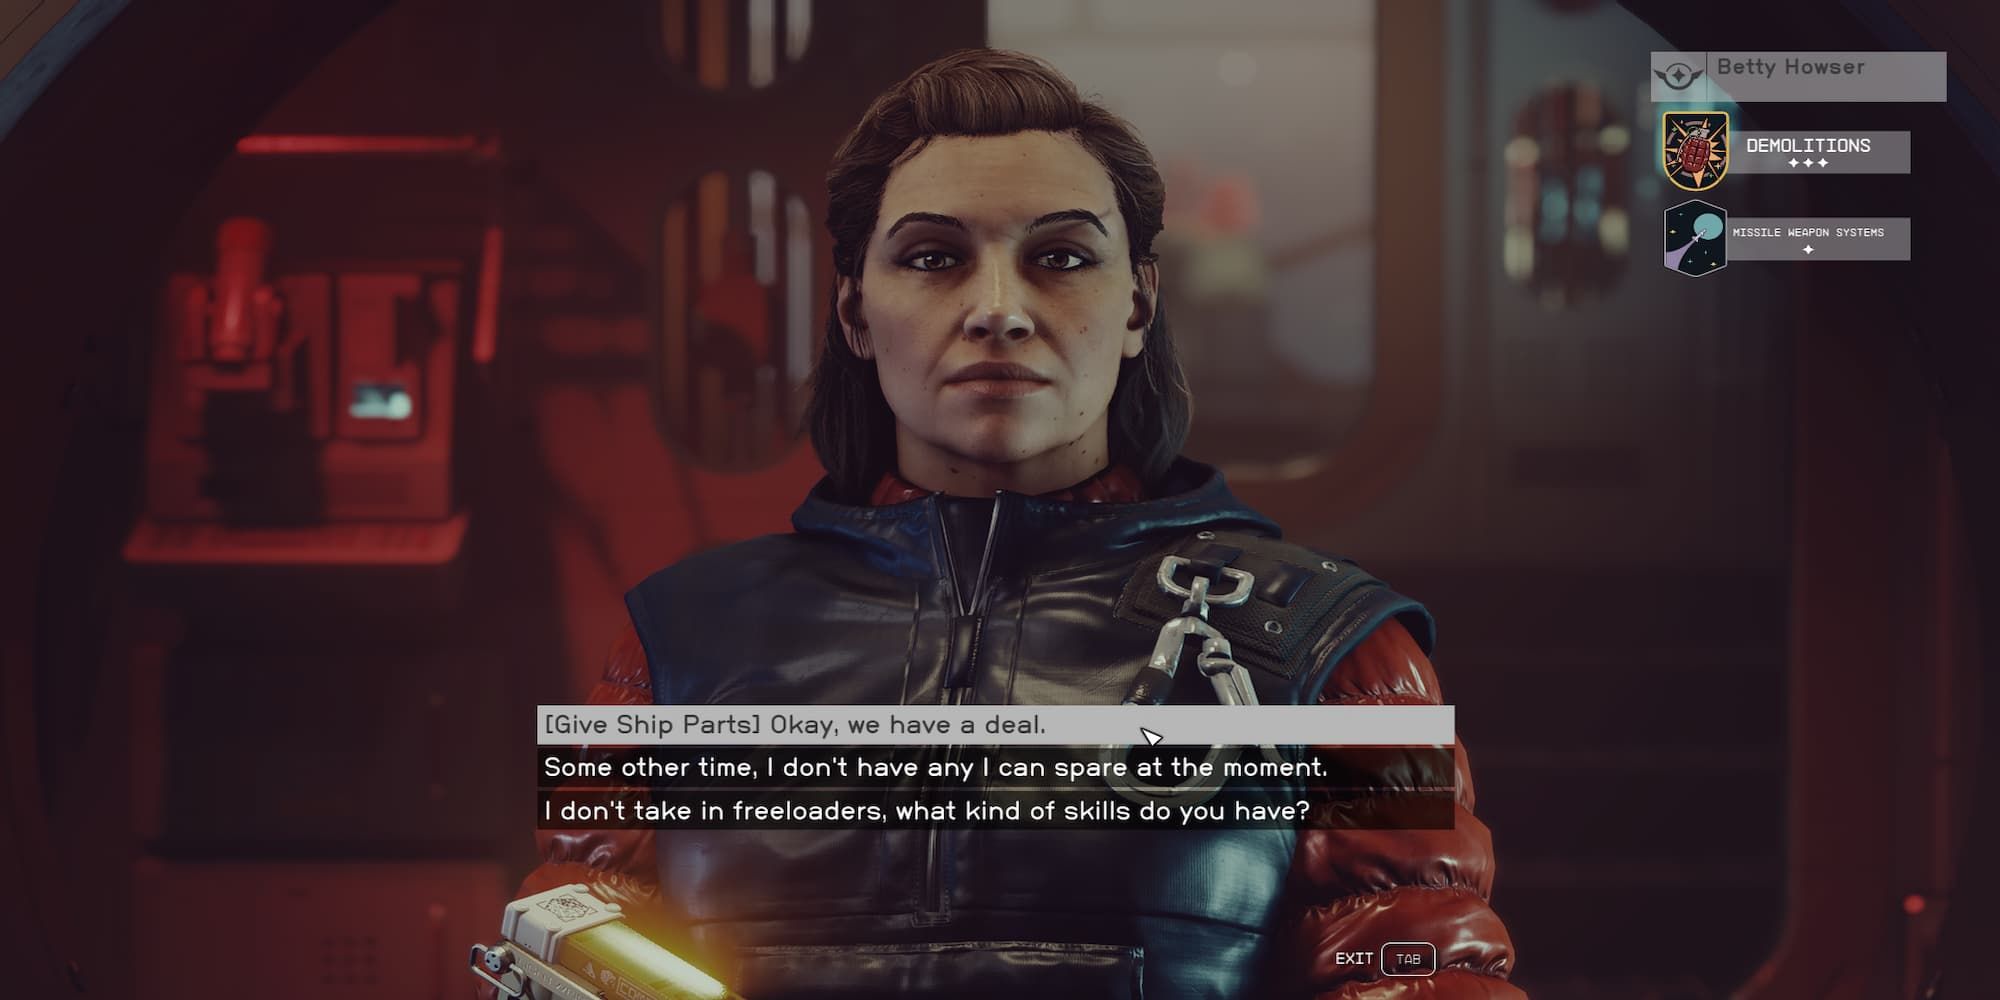 Betty Being Recruited By The Player